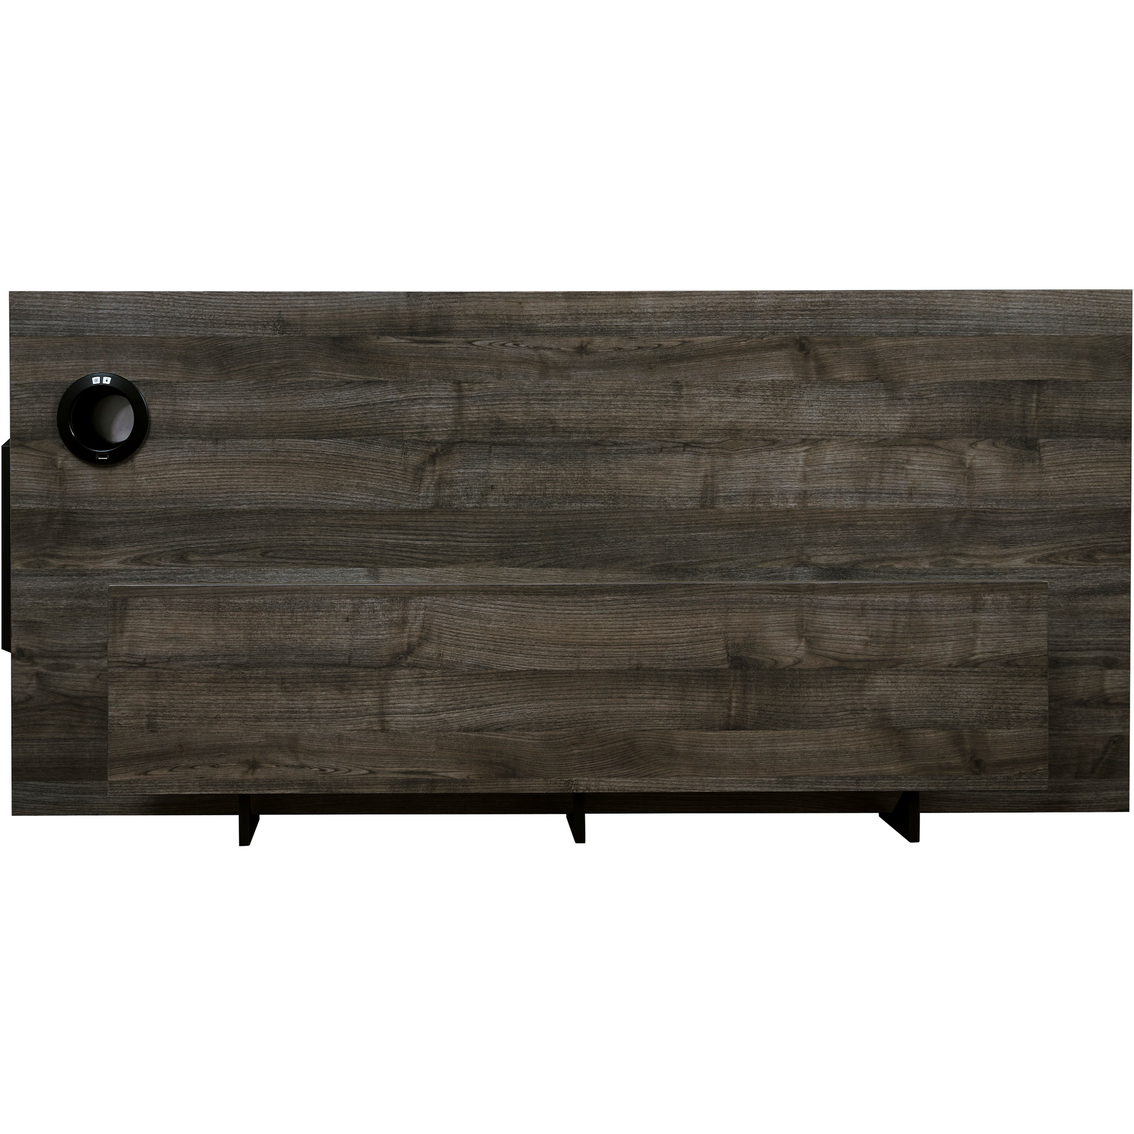 Signature Design by Ashley Barolli Gaming Desk with Monitor Stand - Image 4 of 8